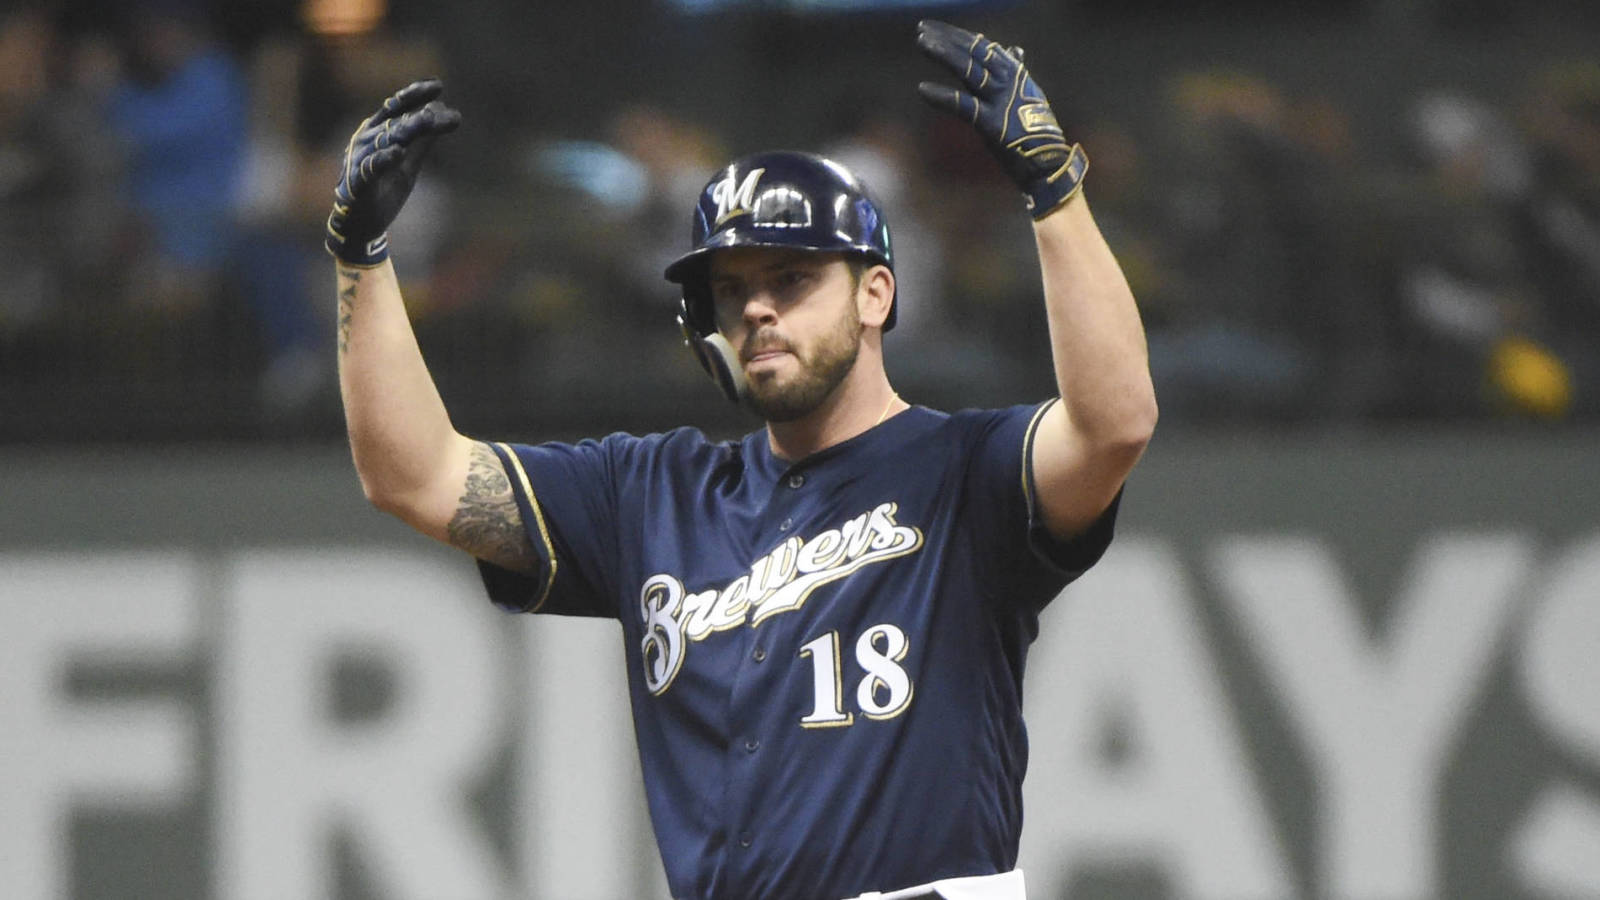 mike moustakas brewers jersey